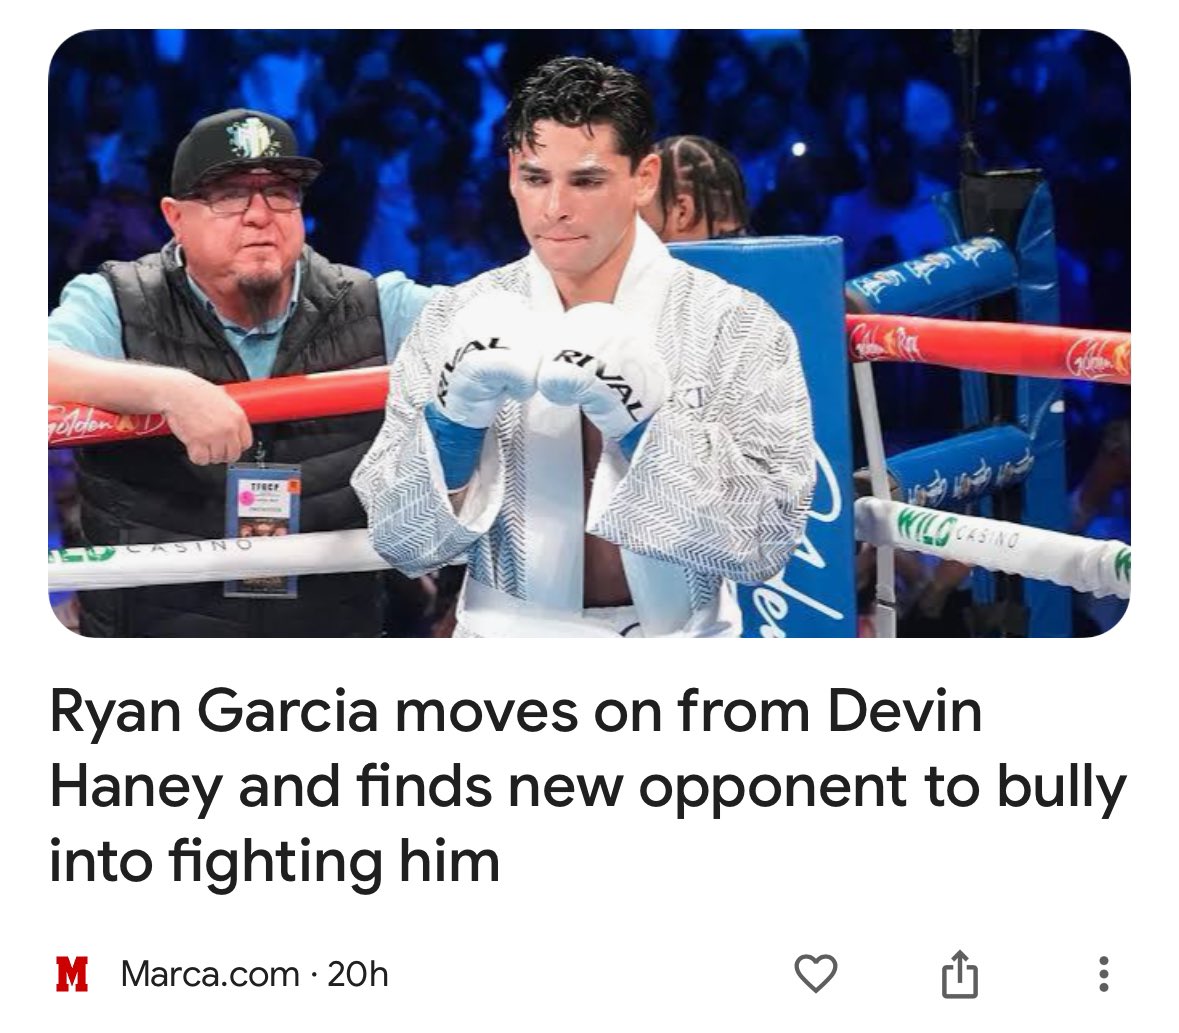 The mainstream media are now saying Ryan Garcia ‘bullied’ Devin Haney into fighting…

You can’t make this shit up 🤣 

@RyanGarcia